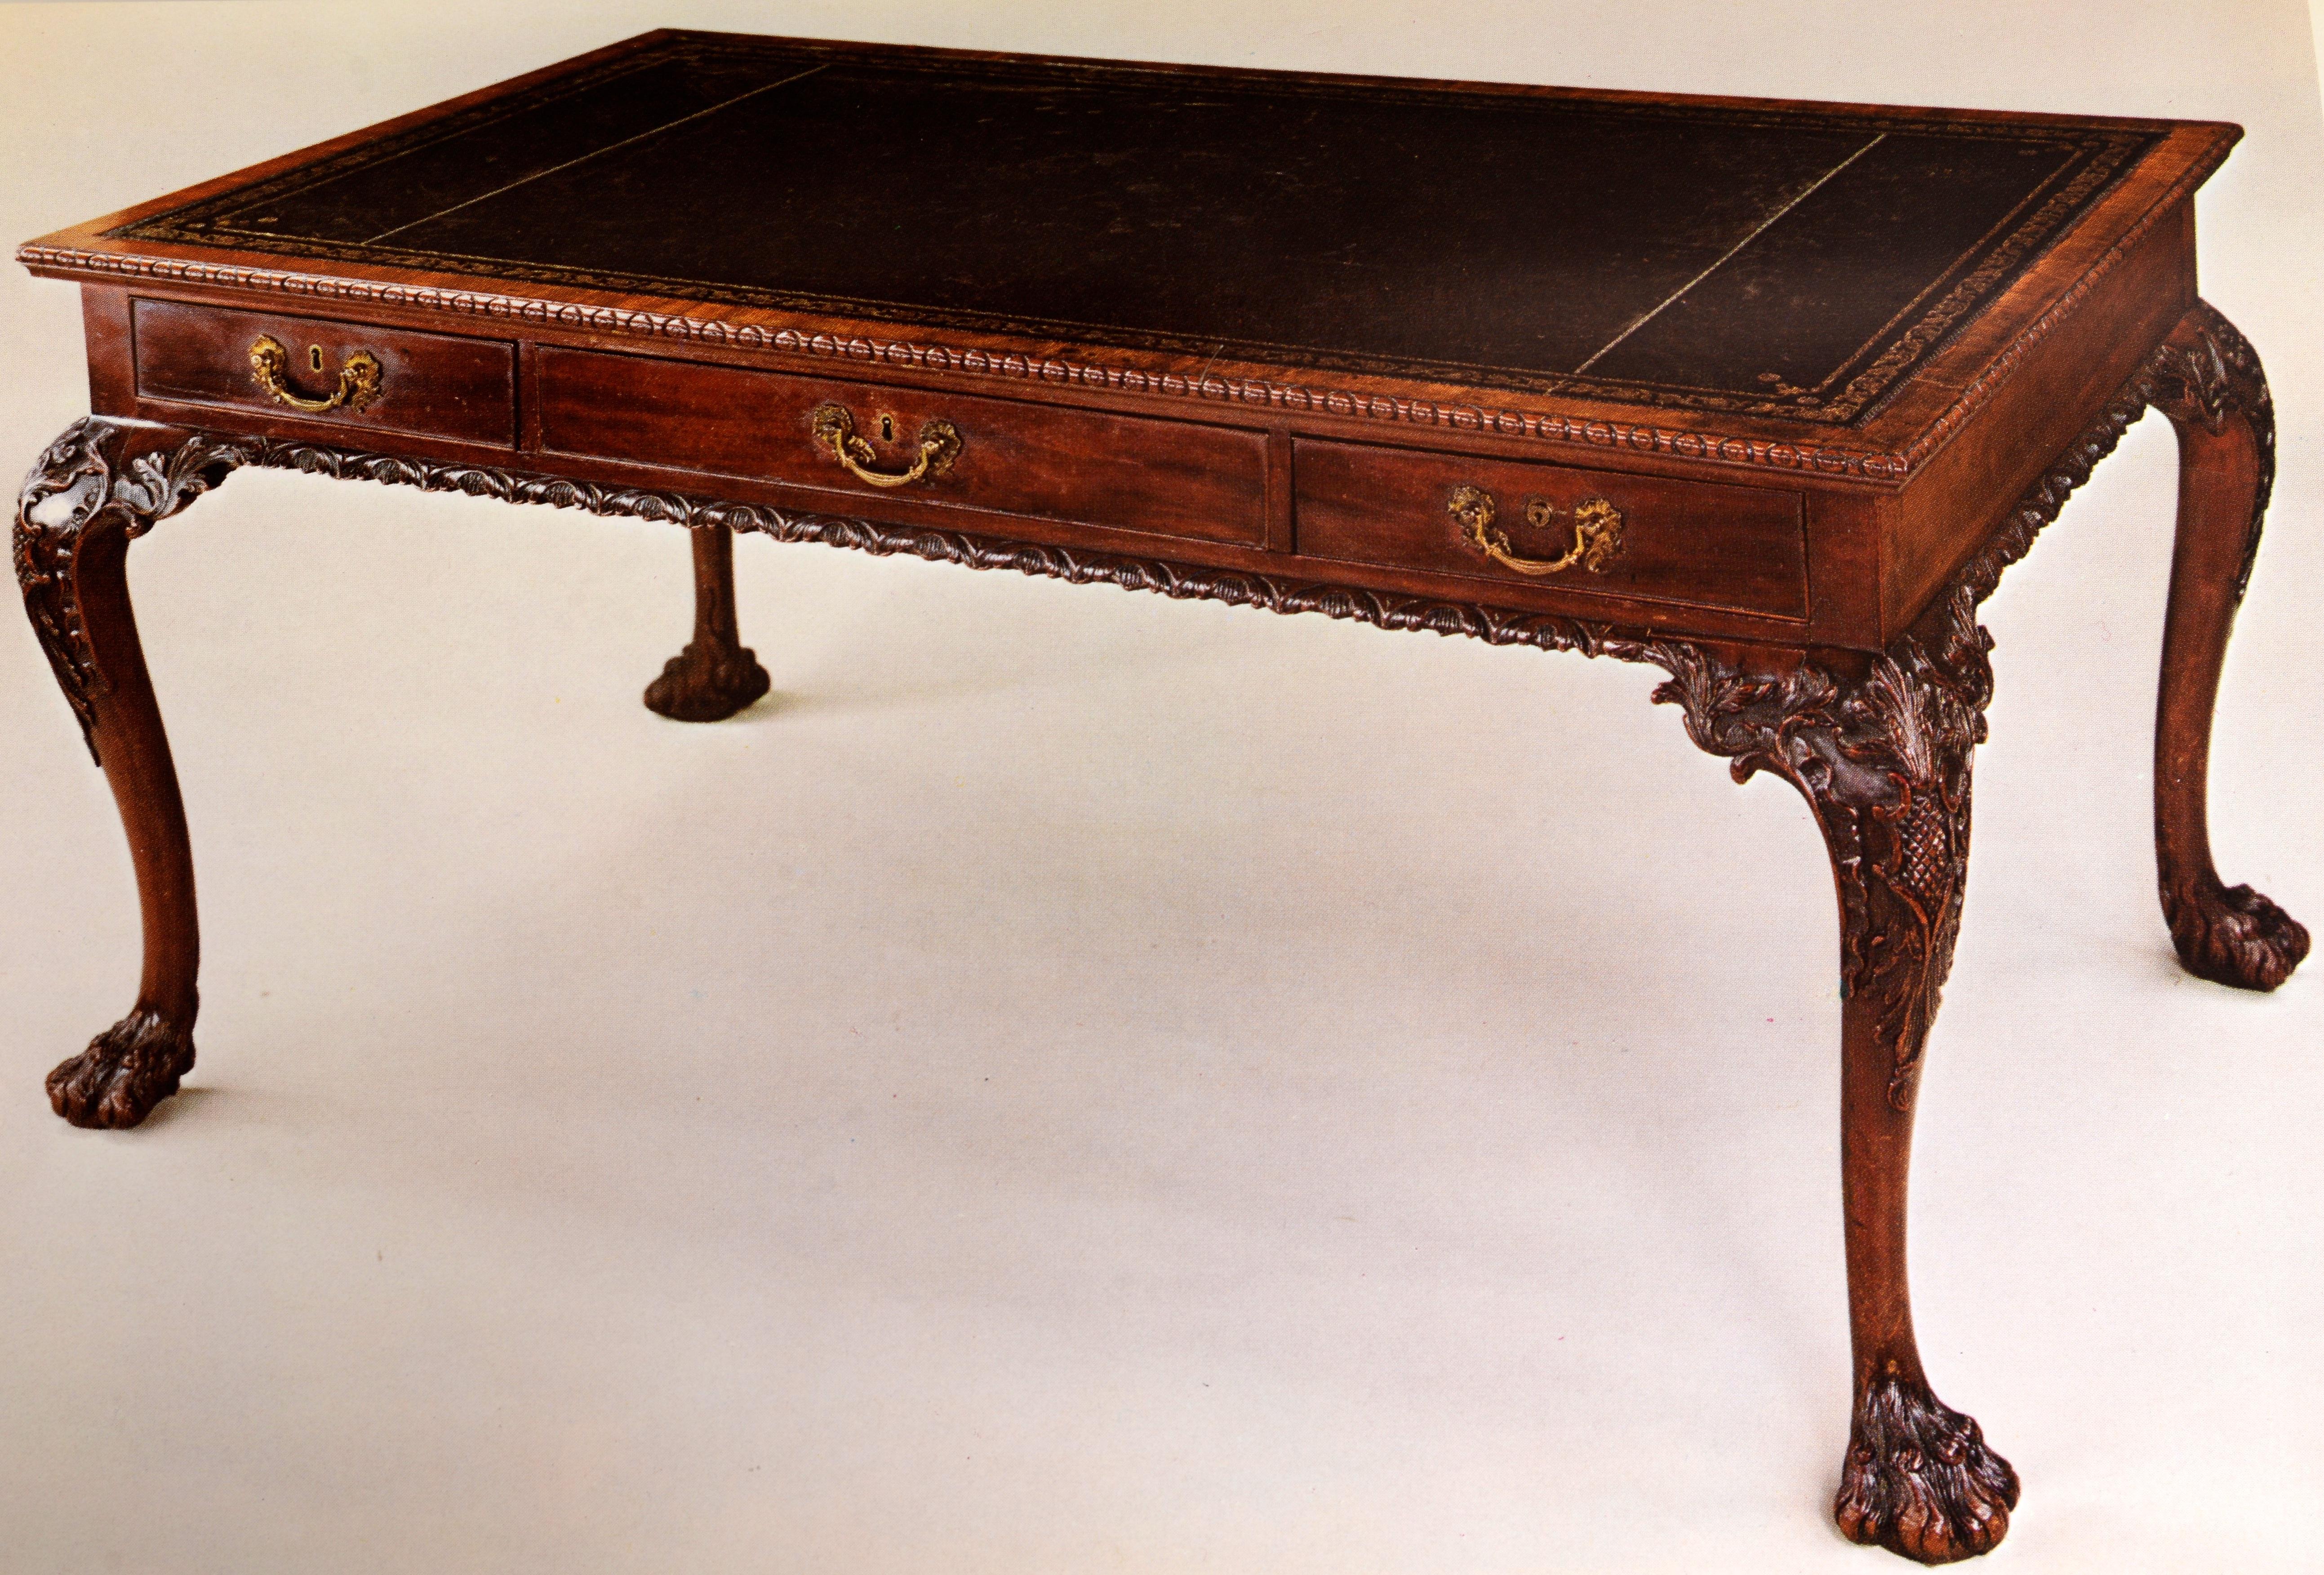 Christie's Part I & II, Childwick Bury, Objects, Fine French & English Furniture For Sale 8